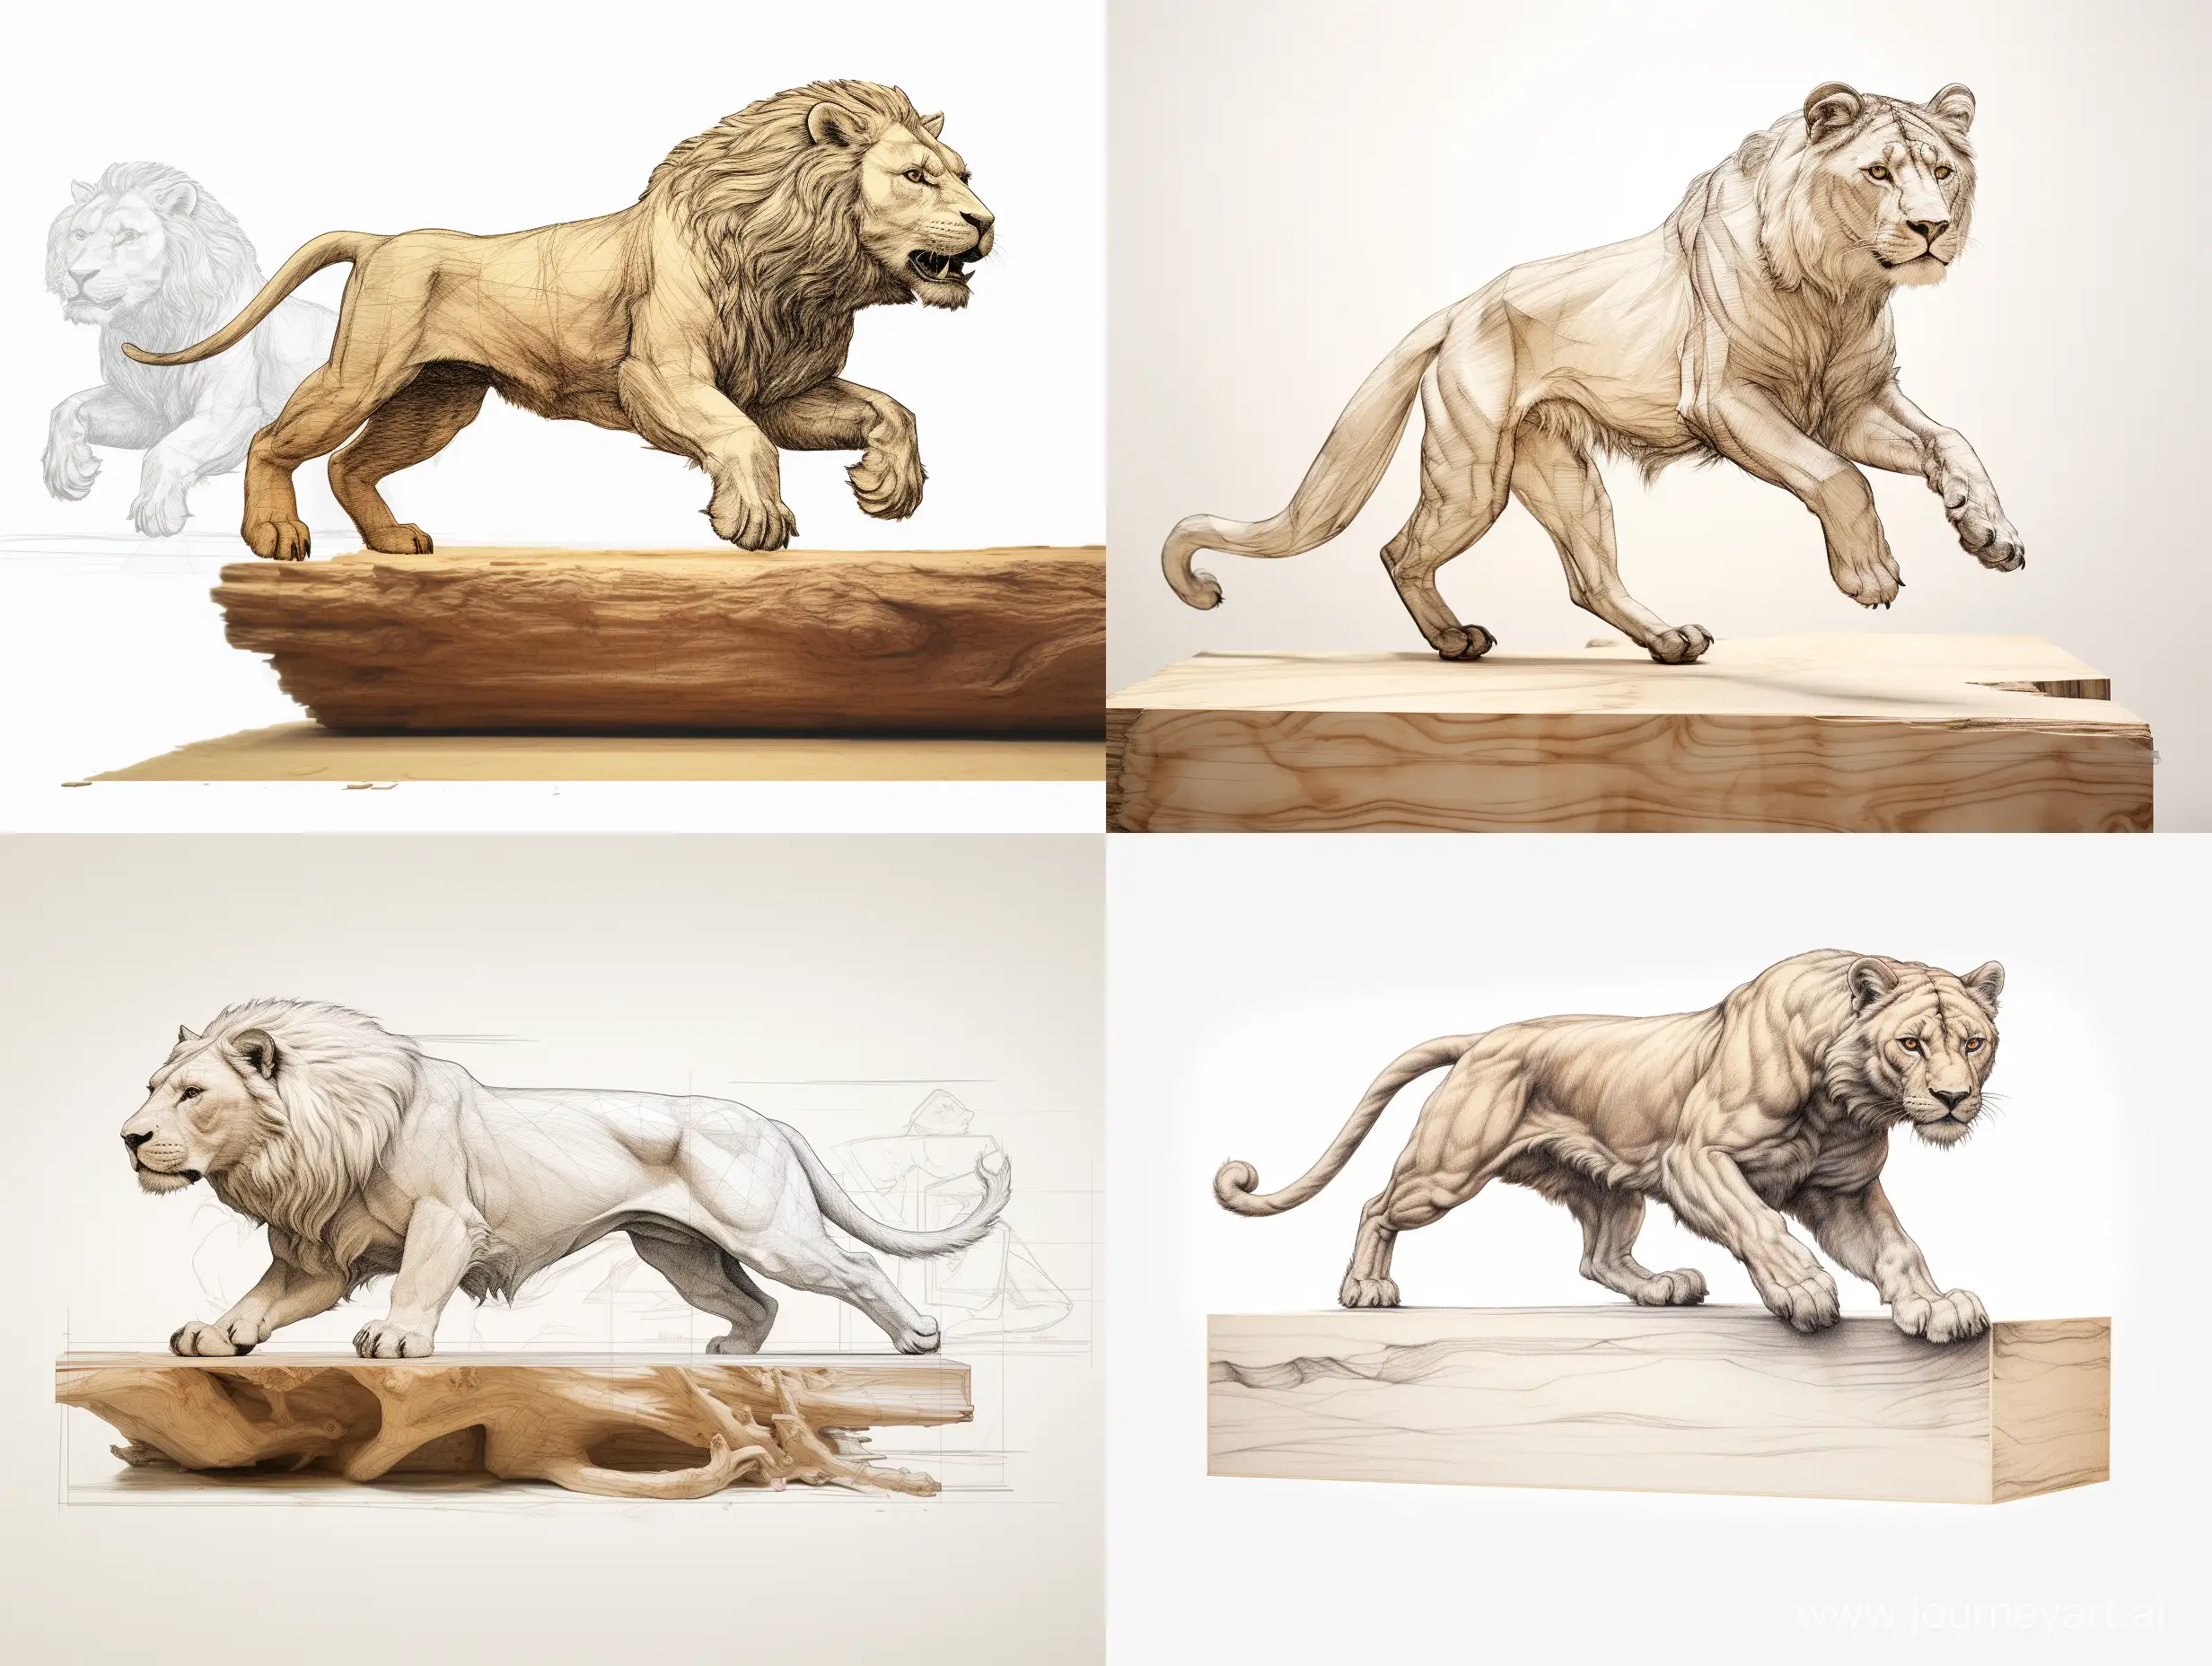 Majestic-Wood-Carving-Lifelike-Panthera-Leo-in-Flight-on-Wooden-Cube